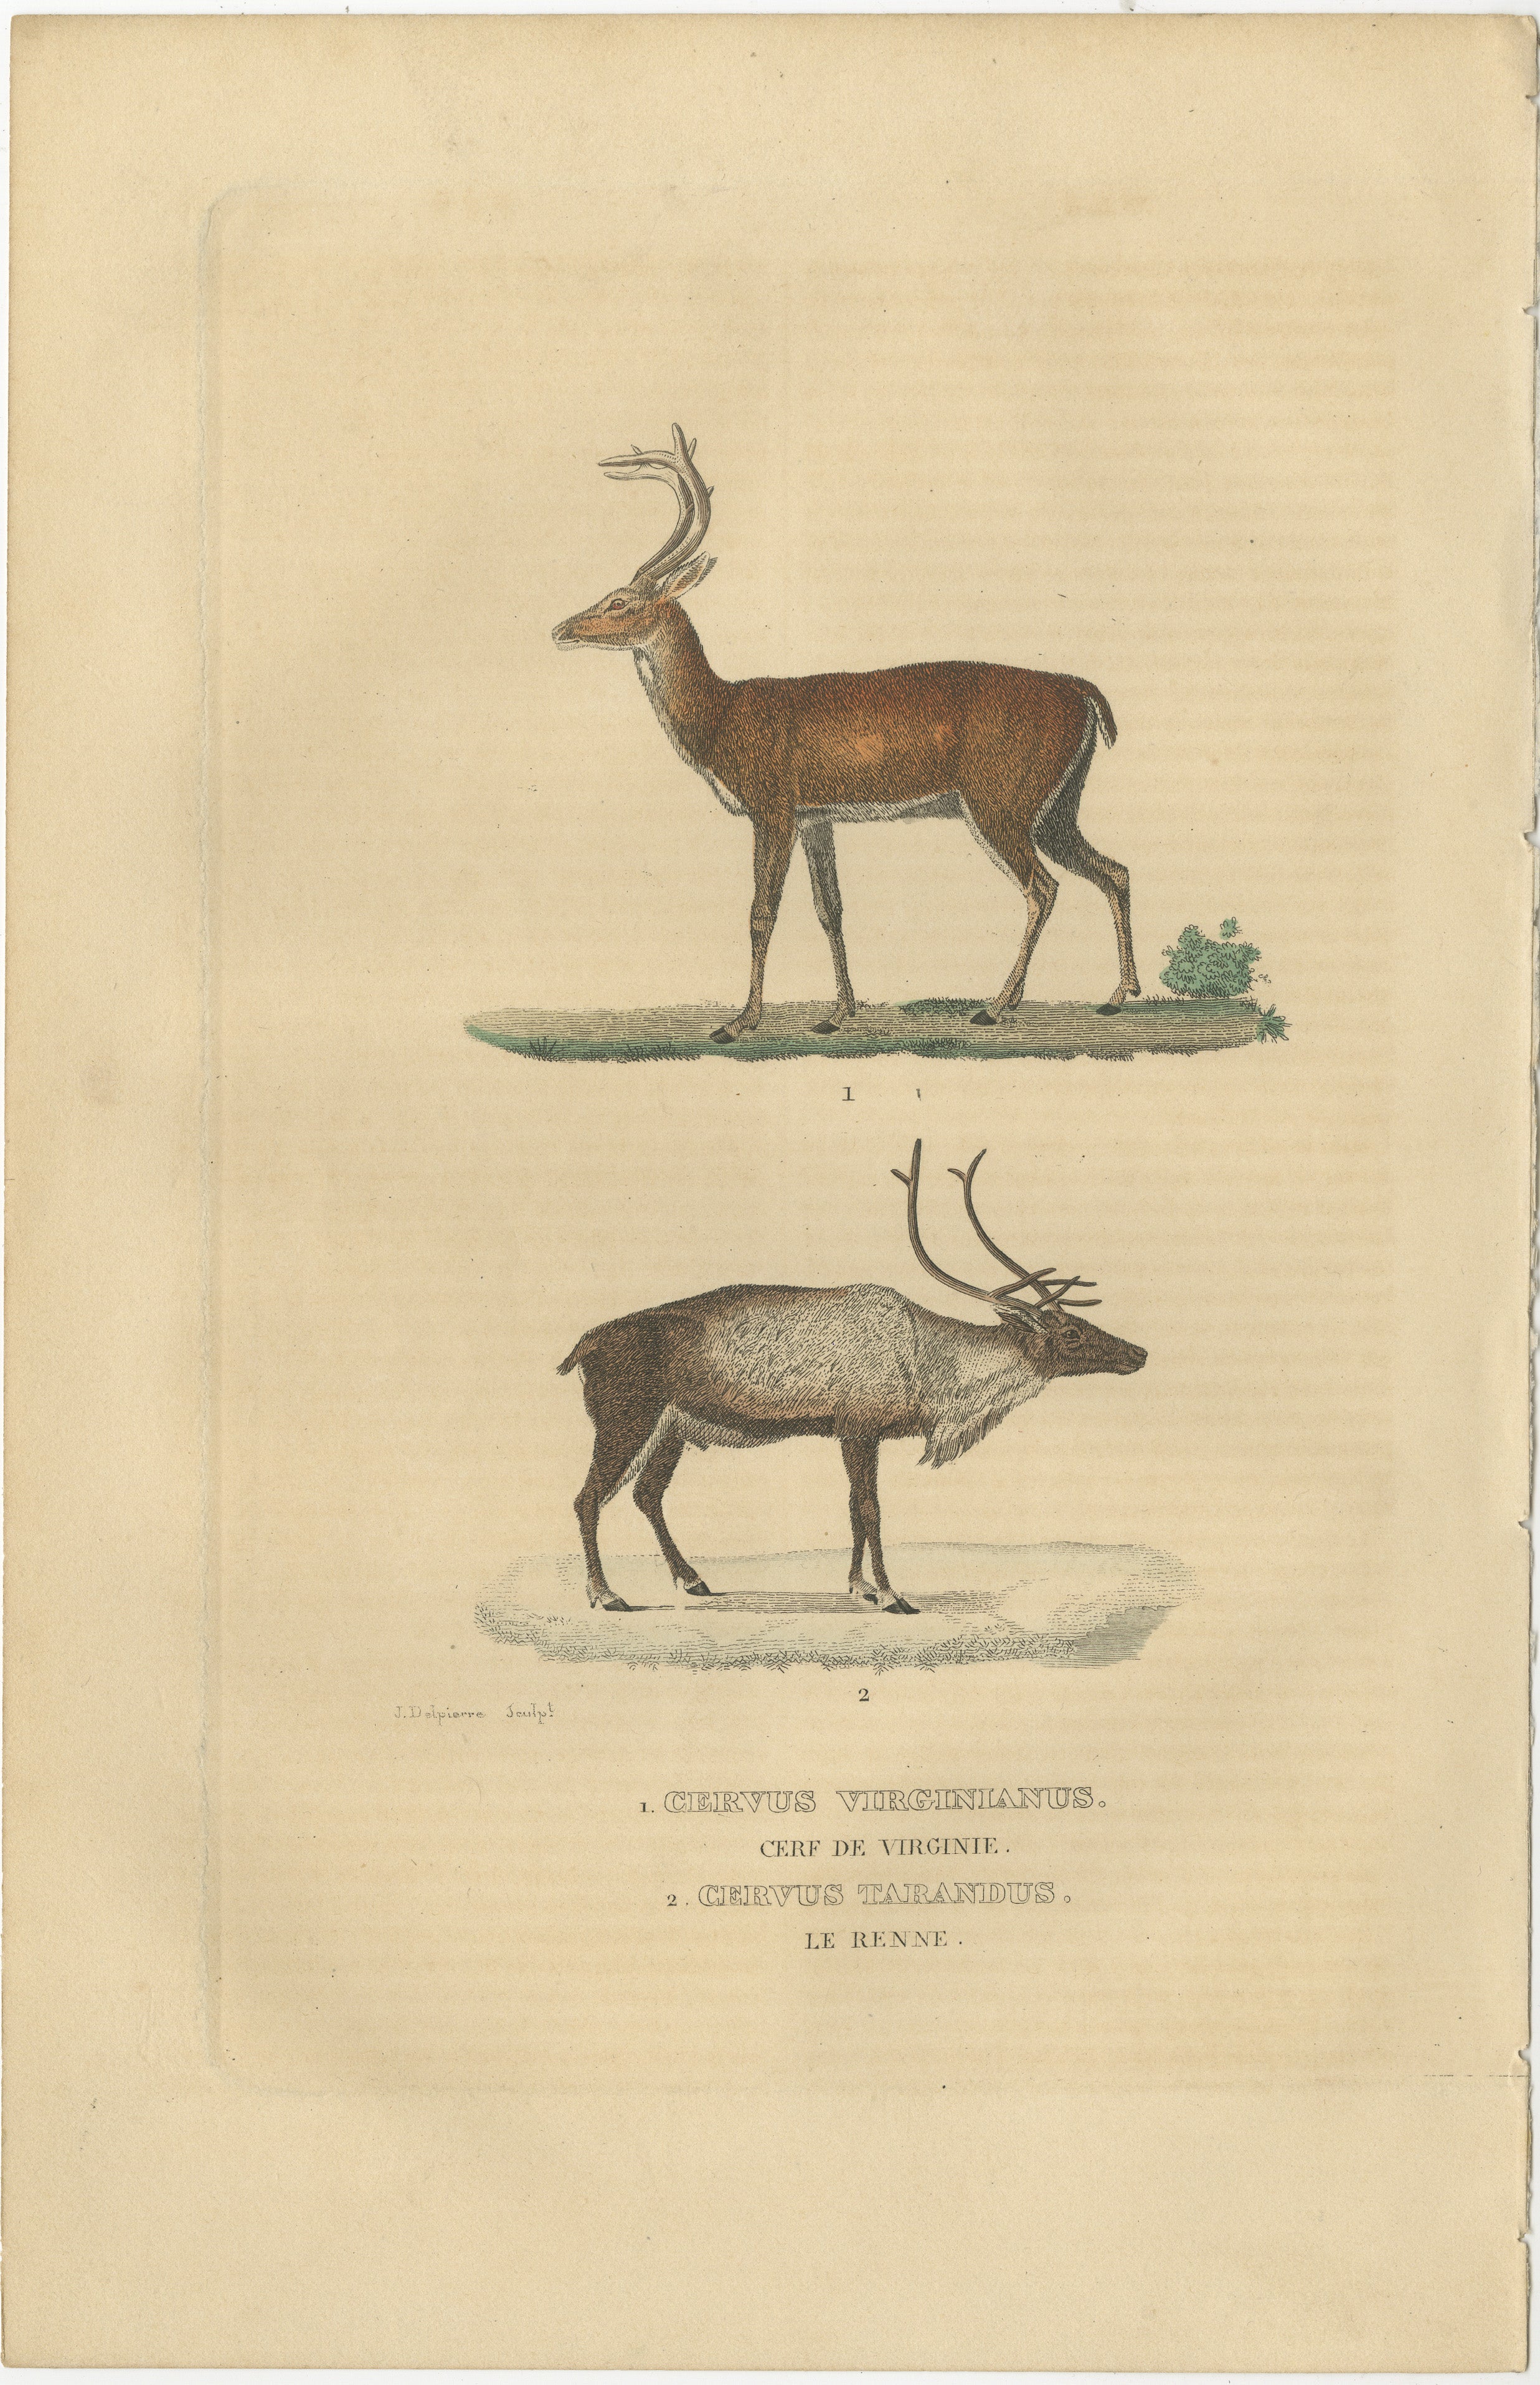 The illustration depicts two species of deer:

1. **Cervus virginianus** - Commonly known as the white-tailed deer, this species is native to the Americas. It is characterized by the white underside to its tail, which it displays prominently when